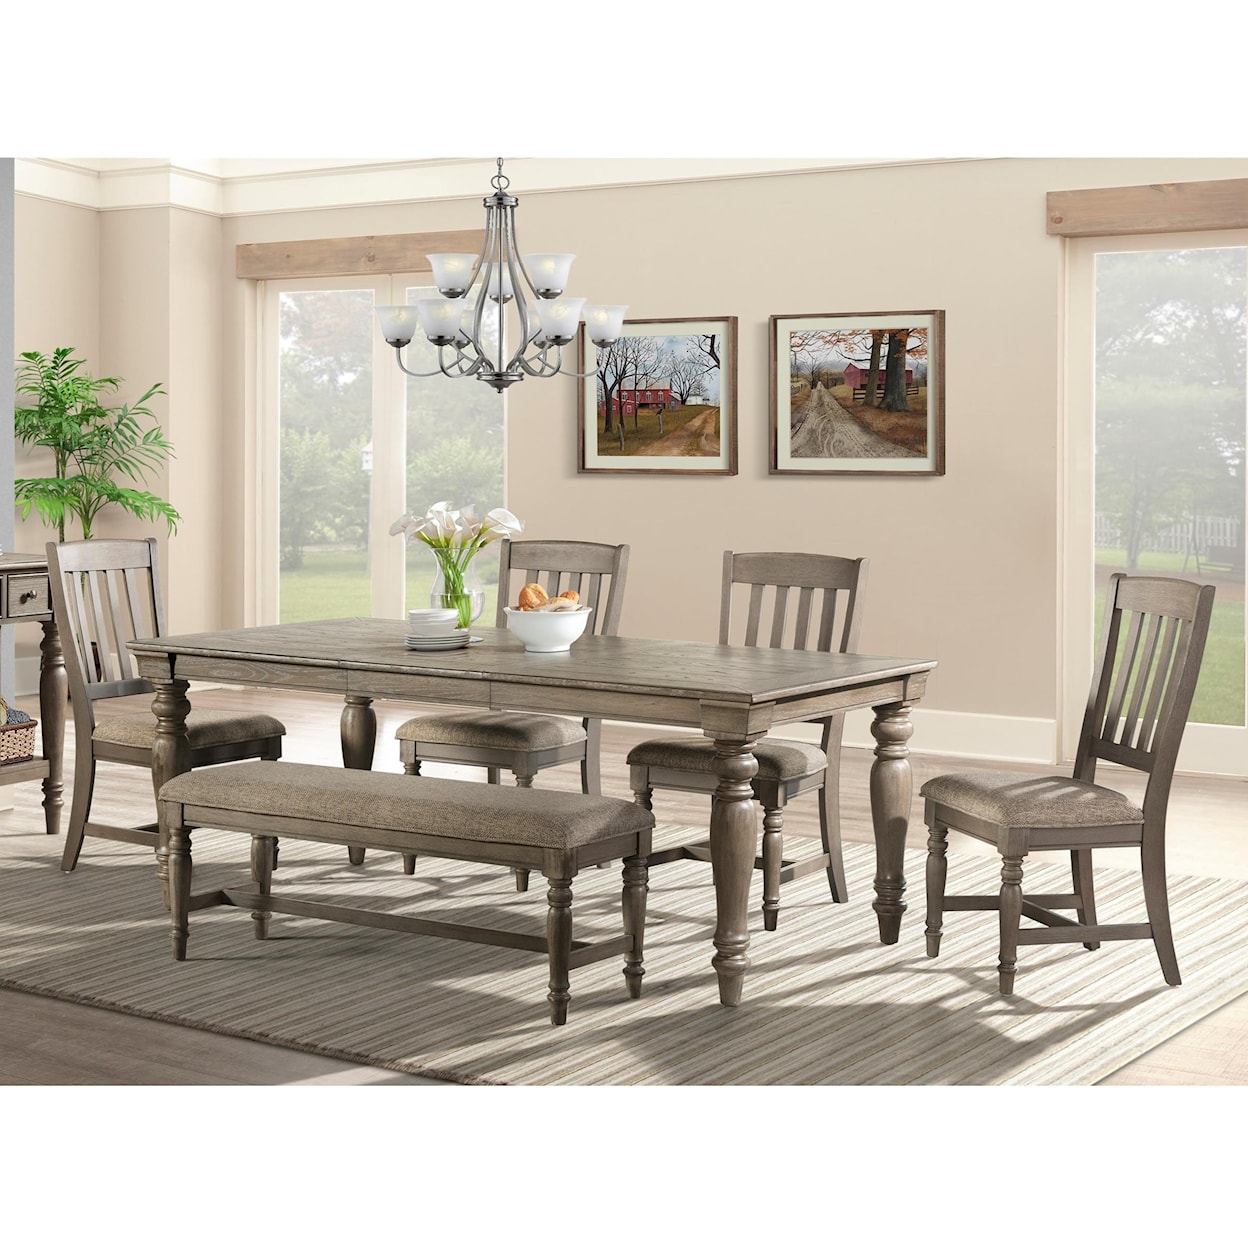 Intercon 11878 Table and Chair Set with Bench